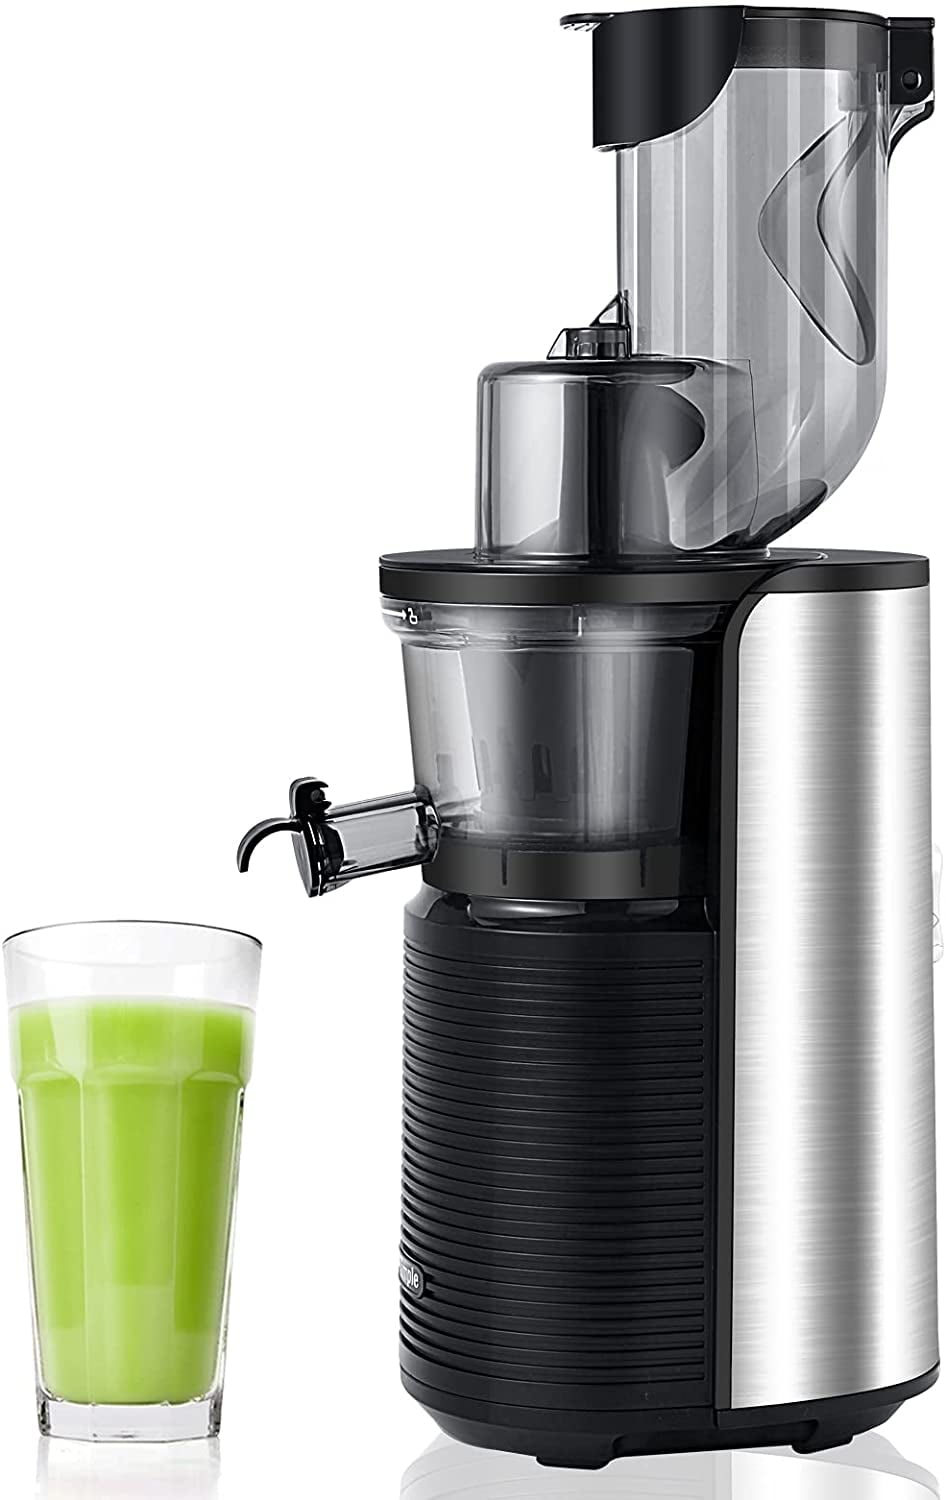 ROVKA Slow Masticating Juicer Extractor,3.15 Inches Wide Chute Cold Press Juicer for Easy Juice,High Juice Yield for Fruit and Vegetable 